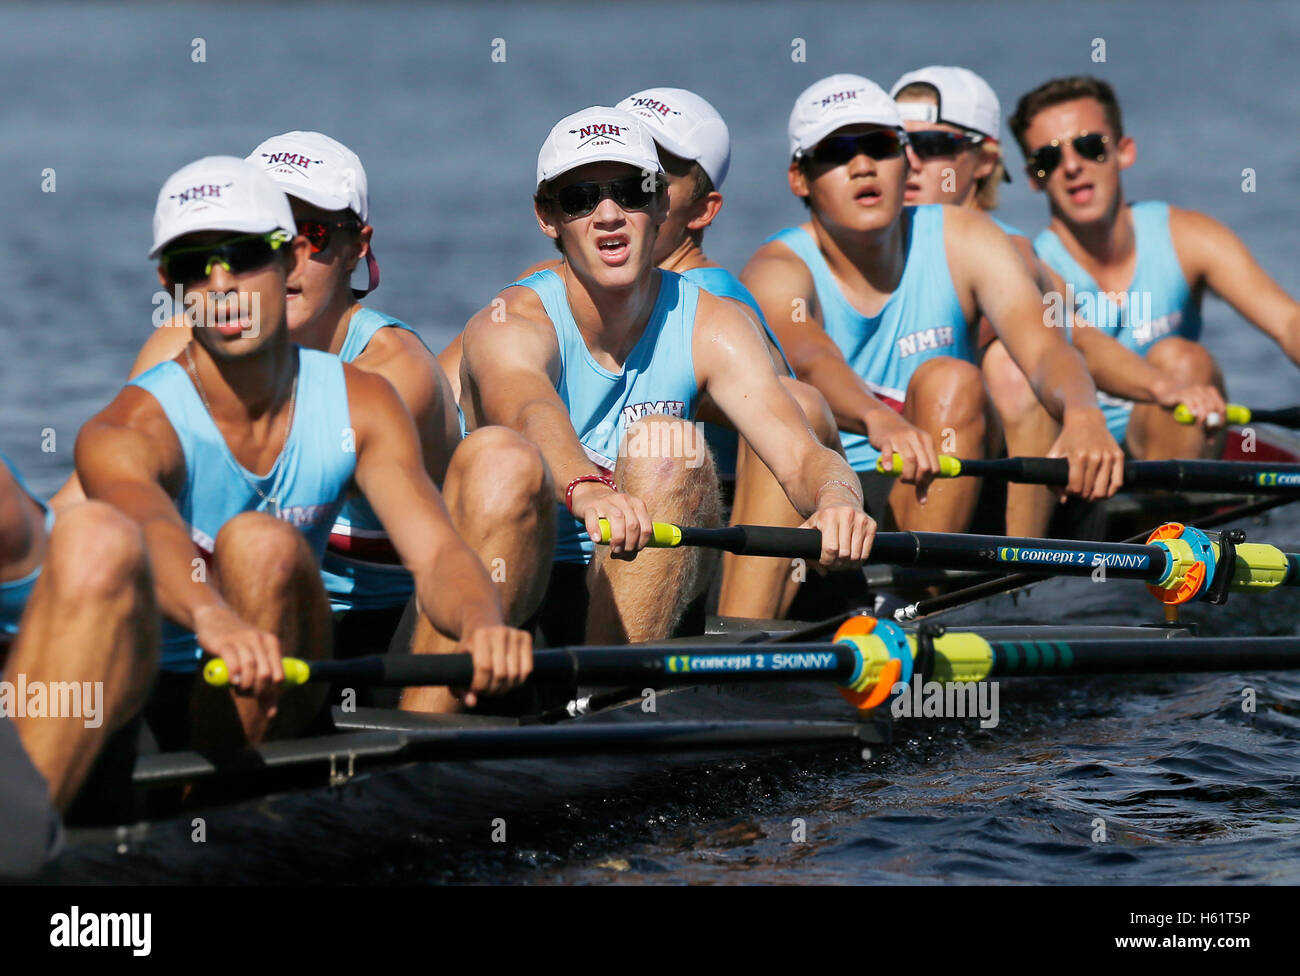 High school team sports, rowing on the Connecticut River, Gill, Massachusetts Stock Photo